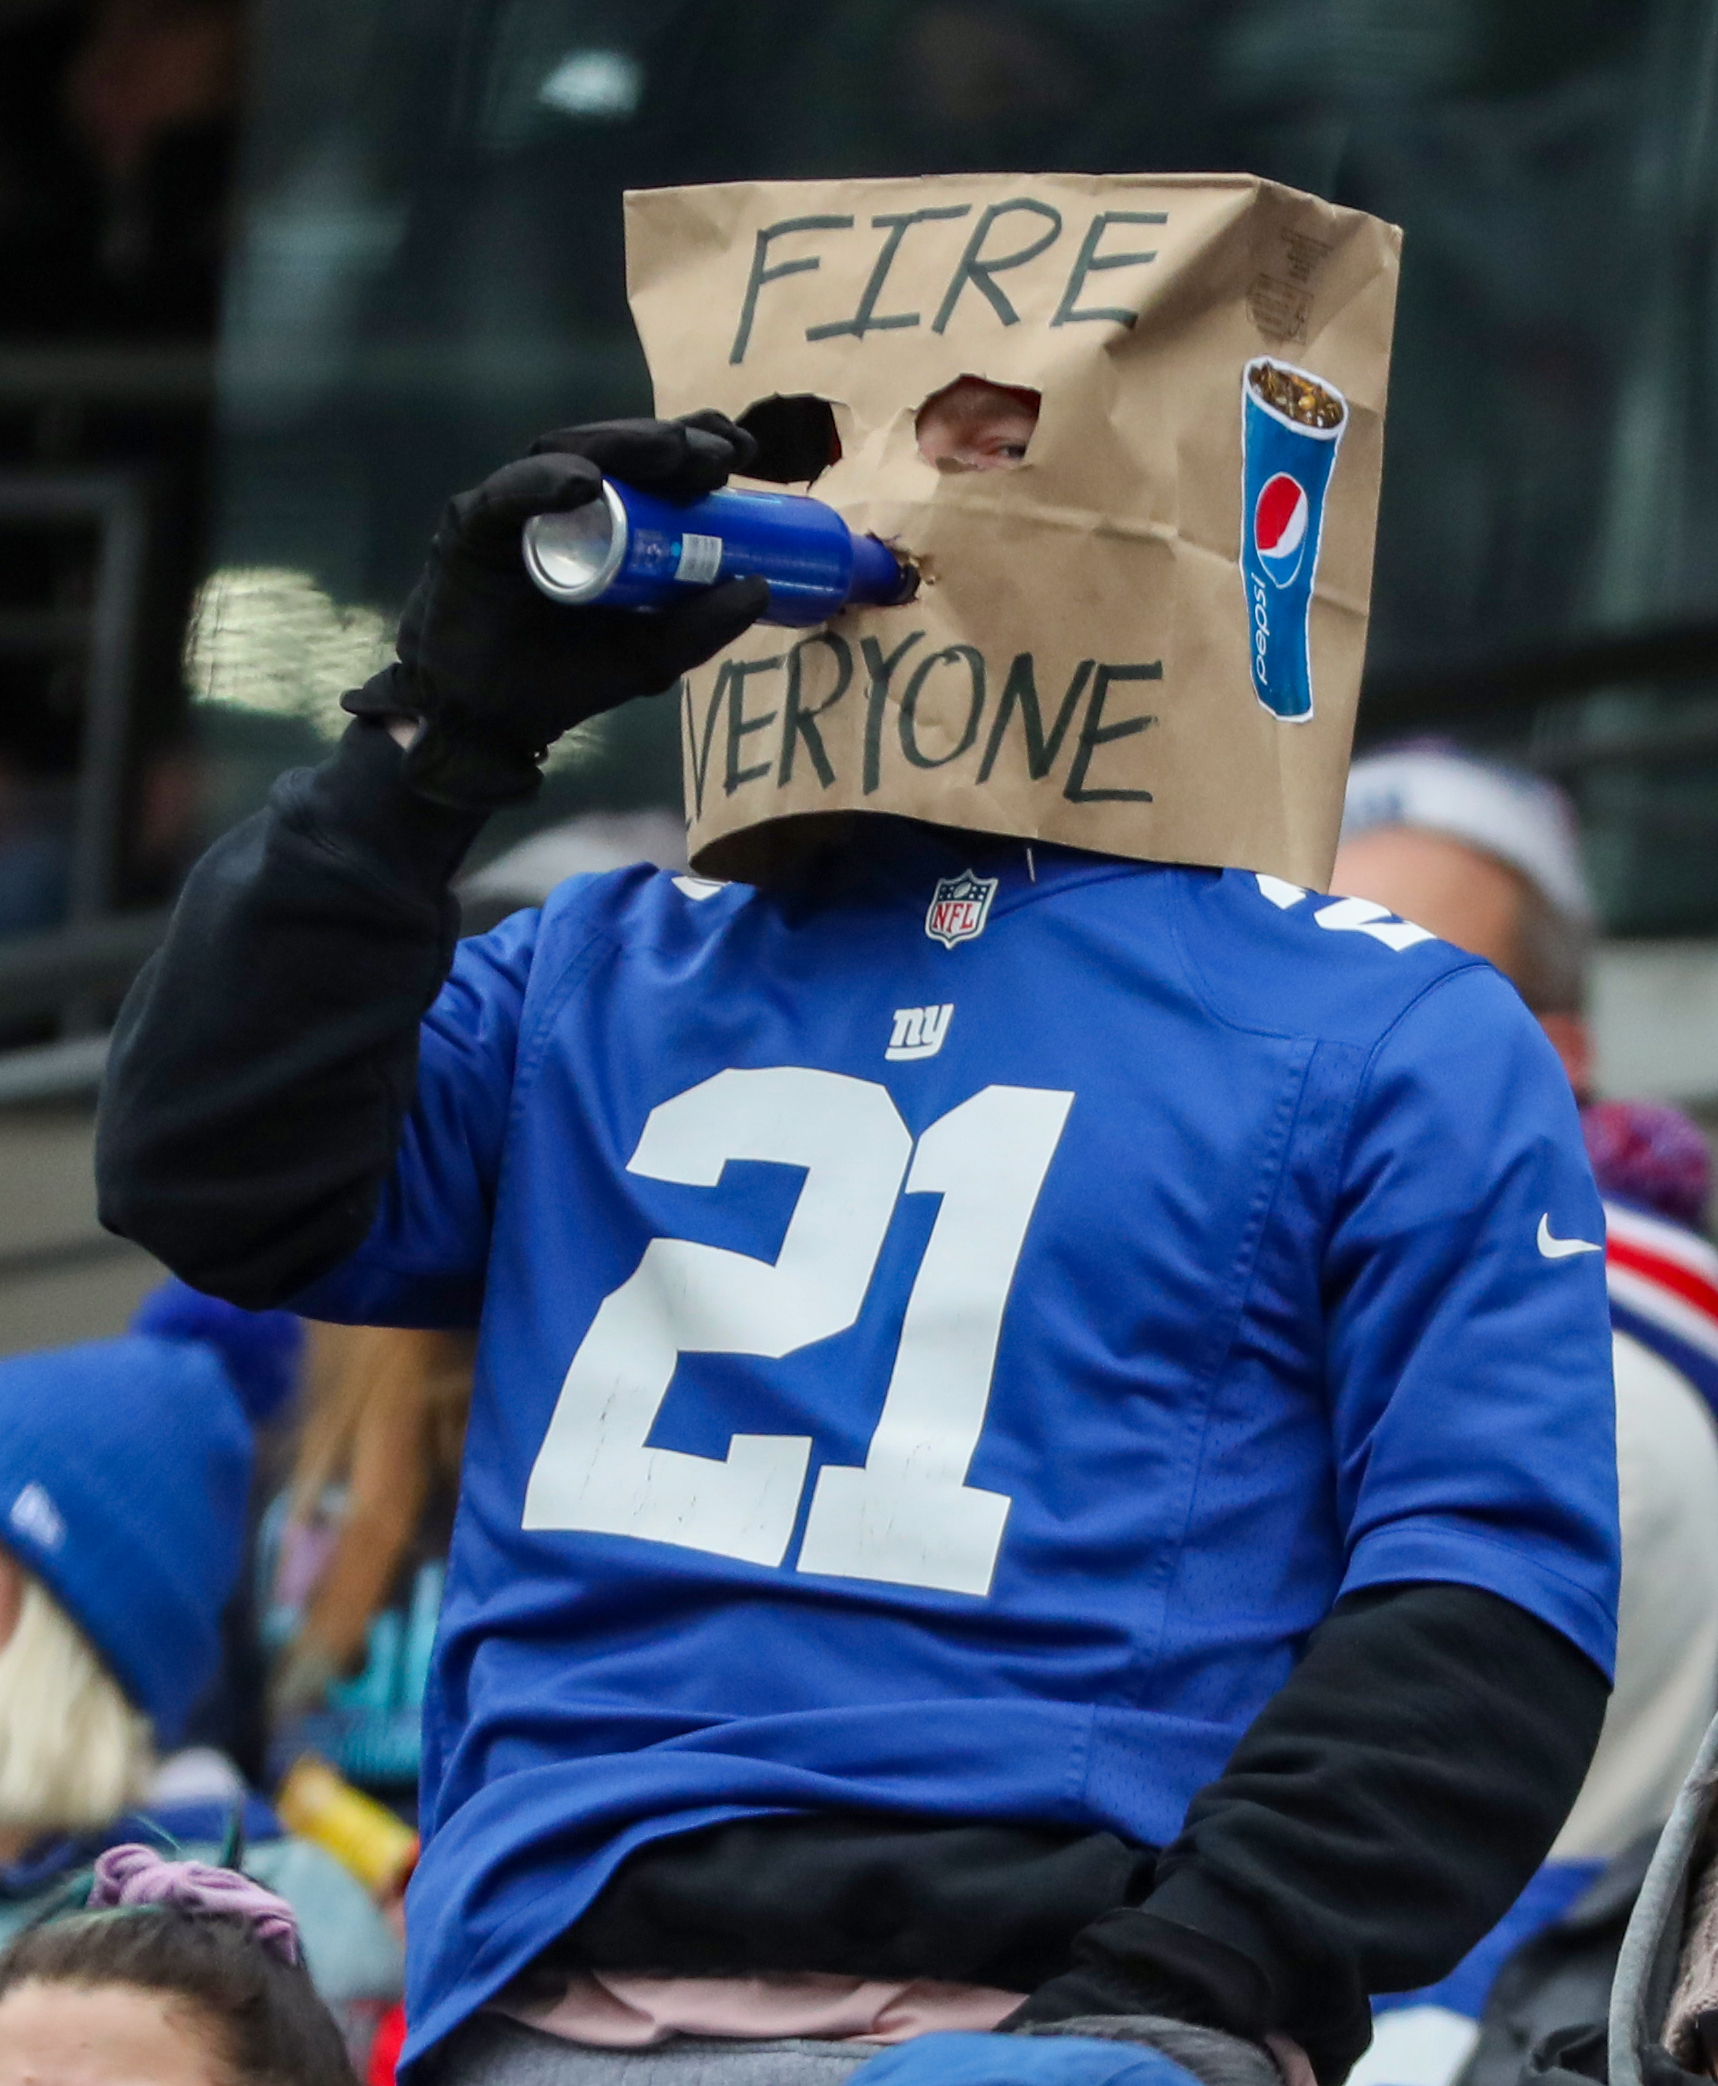 A fan drinks a beer wearing a bag on his head during the second quarter against the Washington Football Team on Sunday, Jan. 9, 2022 in East Rutherford, N.J.